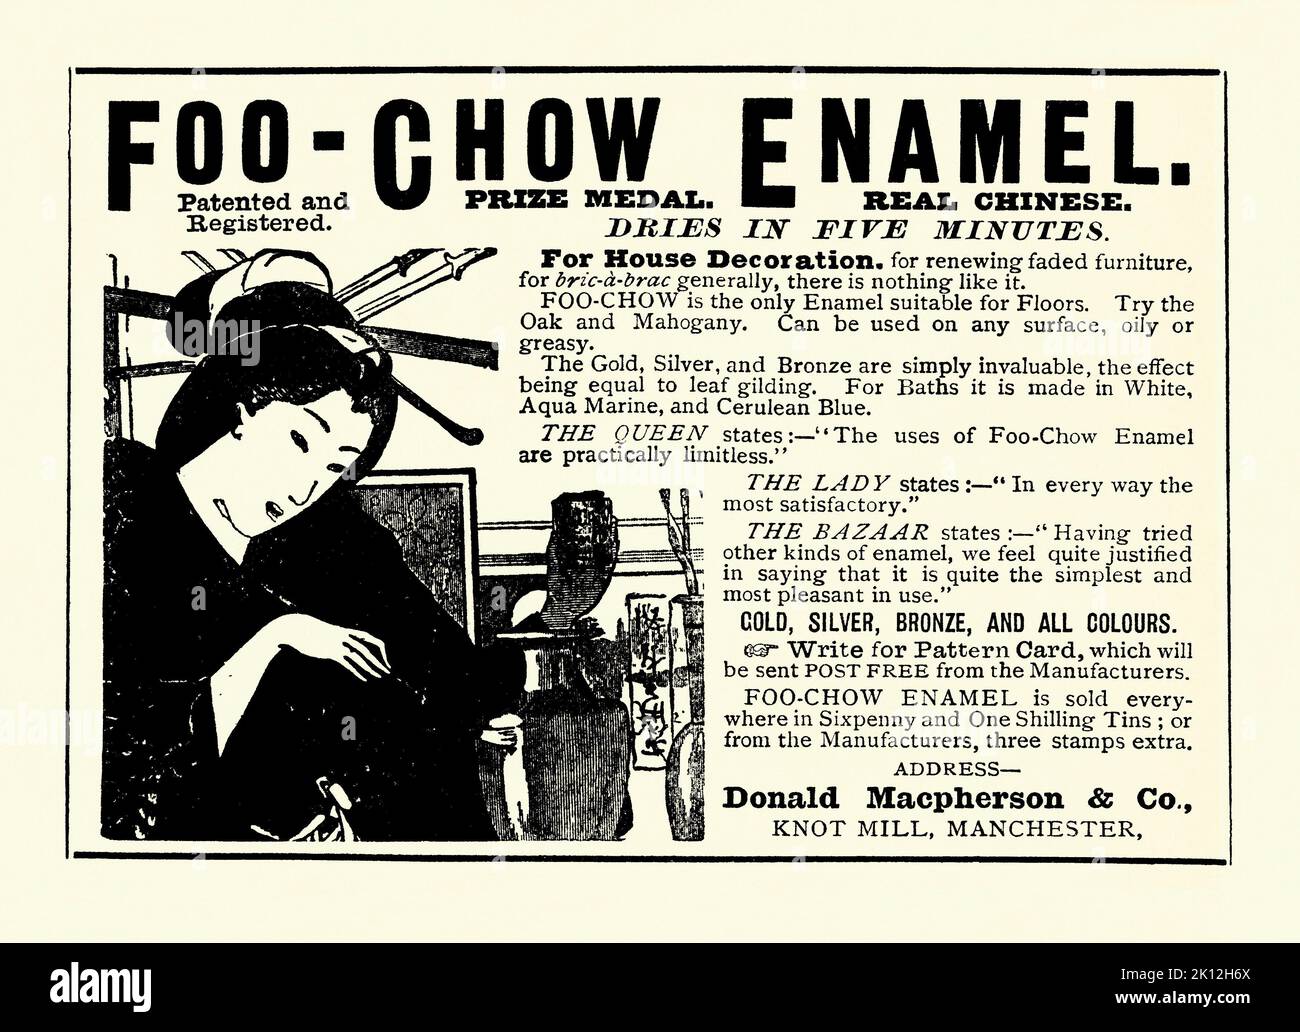 An old Victorian advert for ‘Foo-Chow’ brand enamel paints, made by Donald Macpherson of Manchester, Lancashire, England, UK. It is from a magazine of 1890. The illustration features a woman in Japanese costume painting a vase. The quick-drying, prize-winning ‘real Chinese’ paint was suitable for ‘any surface’ and came in ‘all colours’ including gold, silver and bronze. Painted enamels from China are often known as Canton enamels. The enamel paint was originally used to give the appearance of the more expensive cloisonné work on ceramics and glassware – old 1800s graphics. Stock Photo